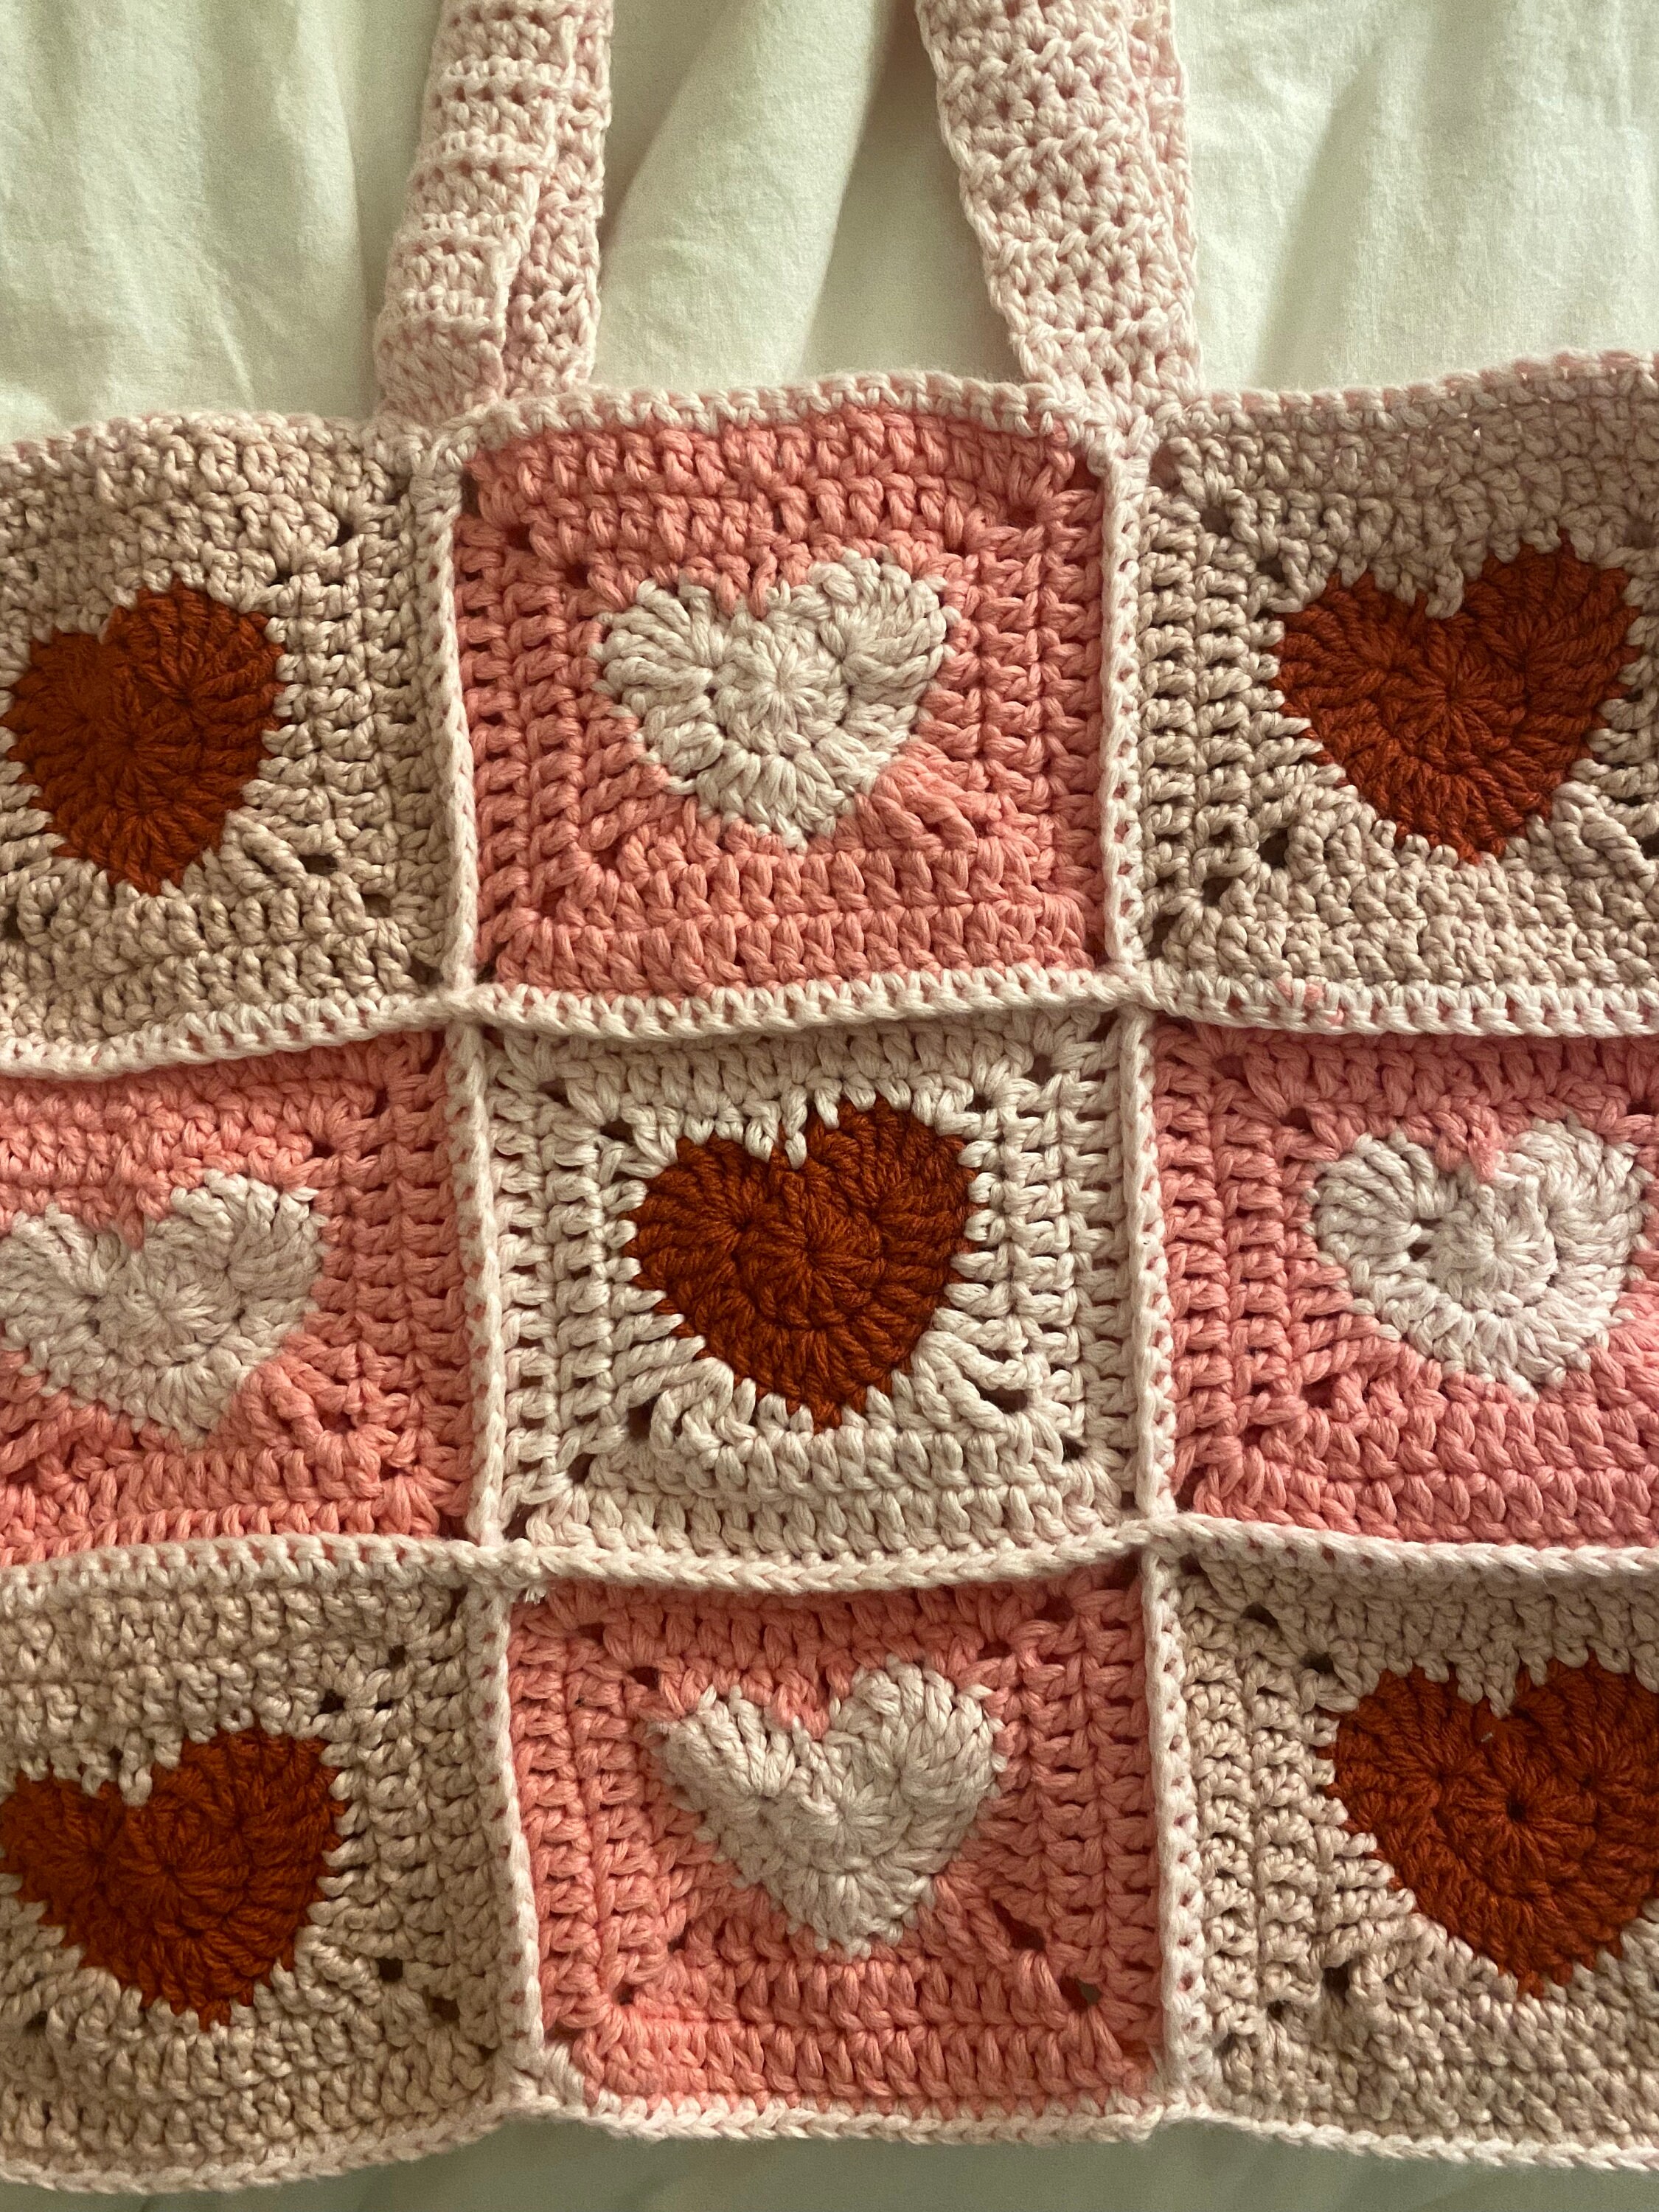 Crochet Heart Tote Bag for Sale by LexCrochet